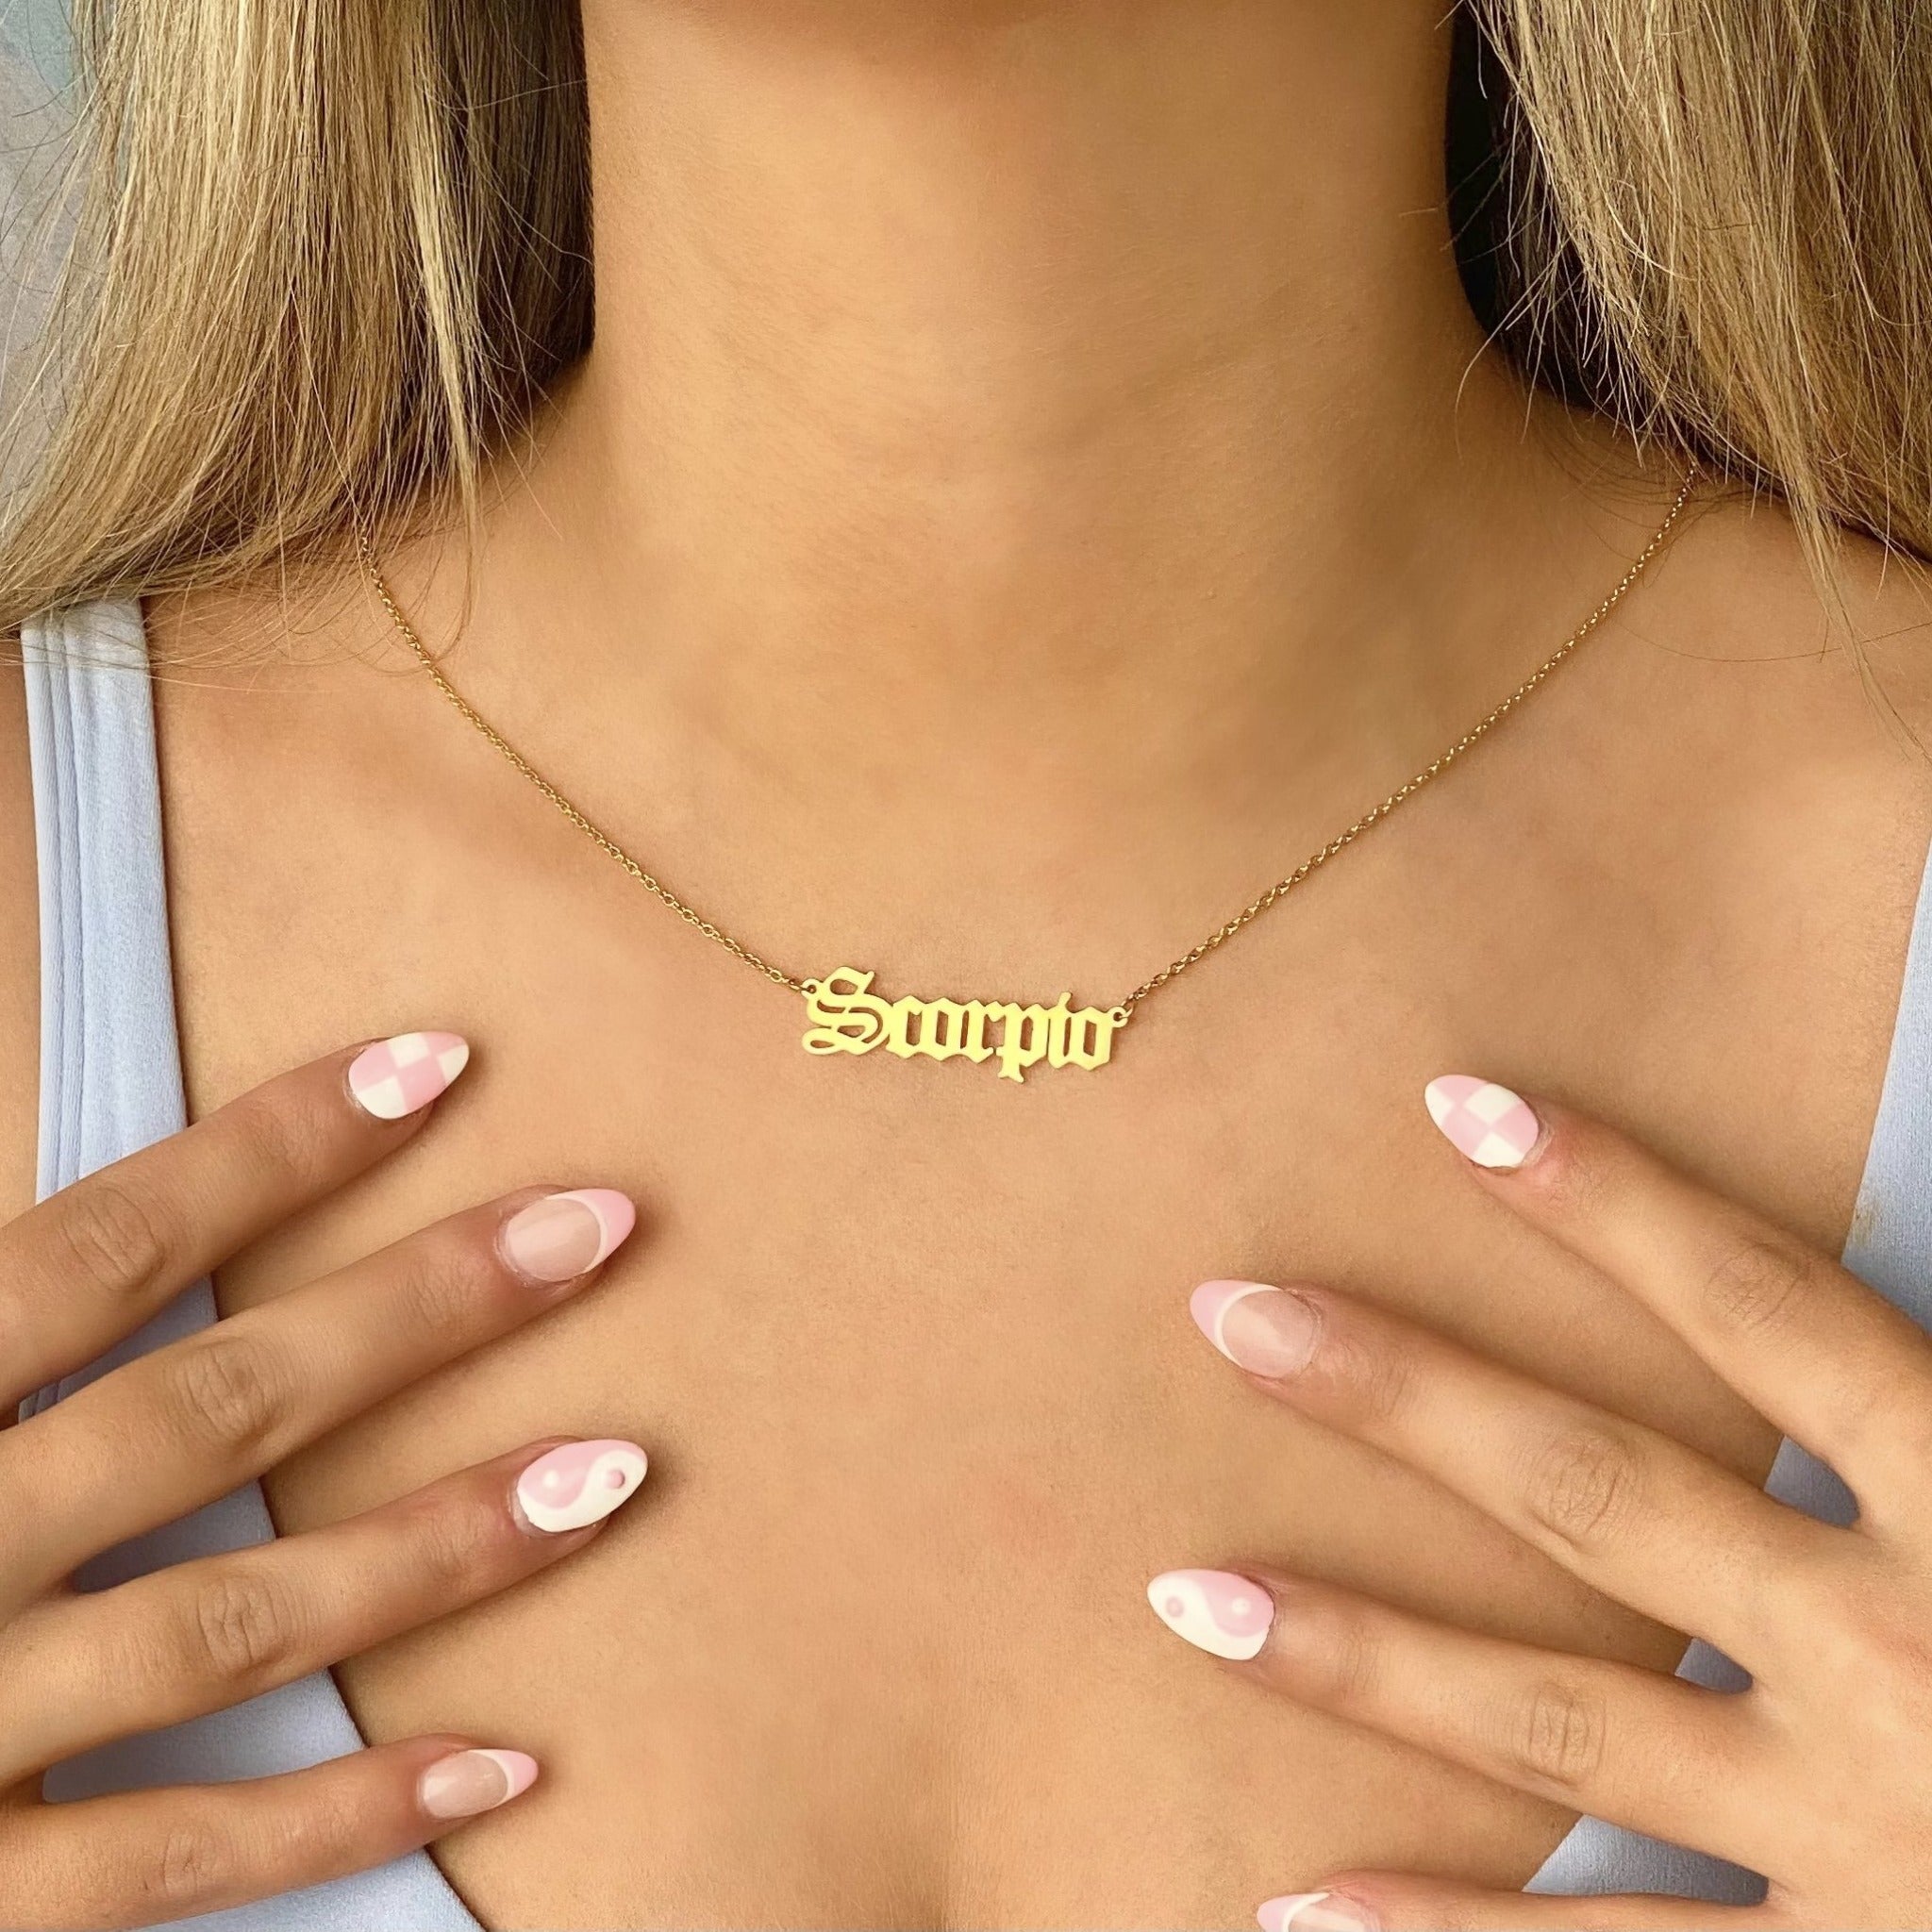 Buy Scorpio Constellation Necklace for Women Girls Scorpio Jewelry Gifts  Scorpio Zodiac Sign Necklaces for Women Scorpio Astrology Necklace Scorpio  Pendant Necklace Gifts at Amazon.in